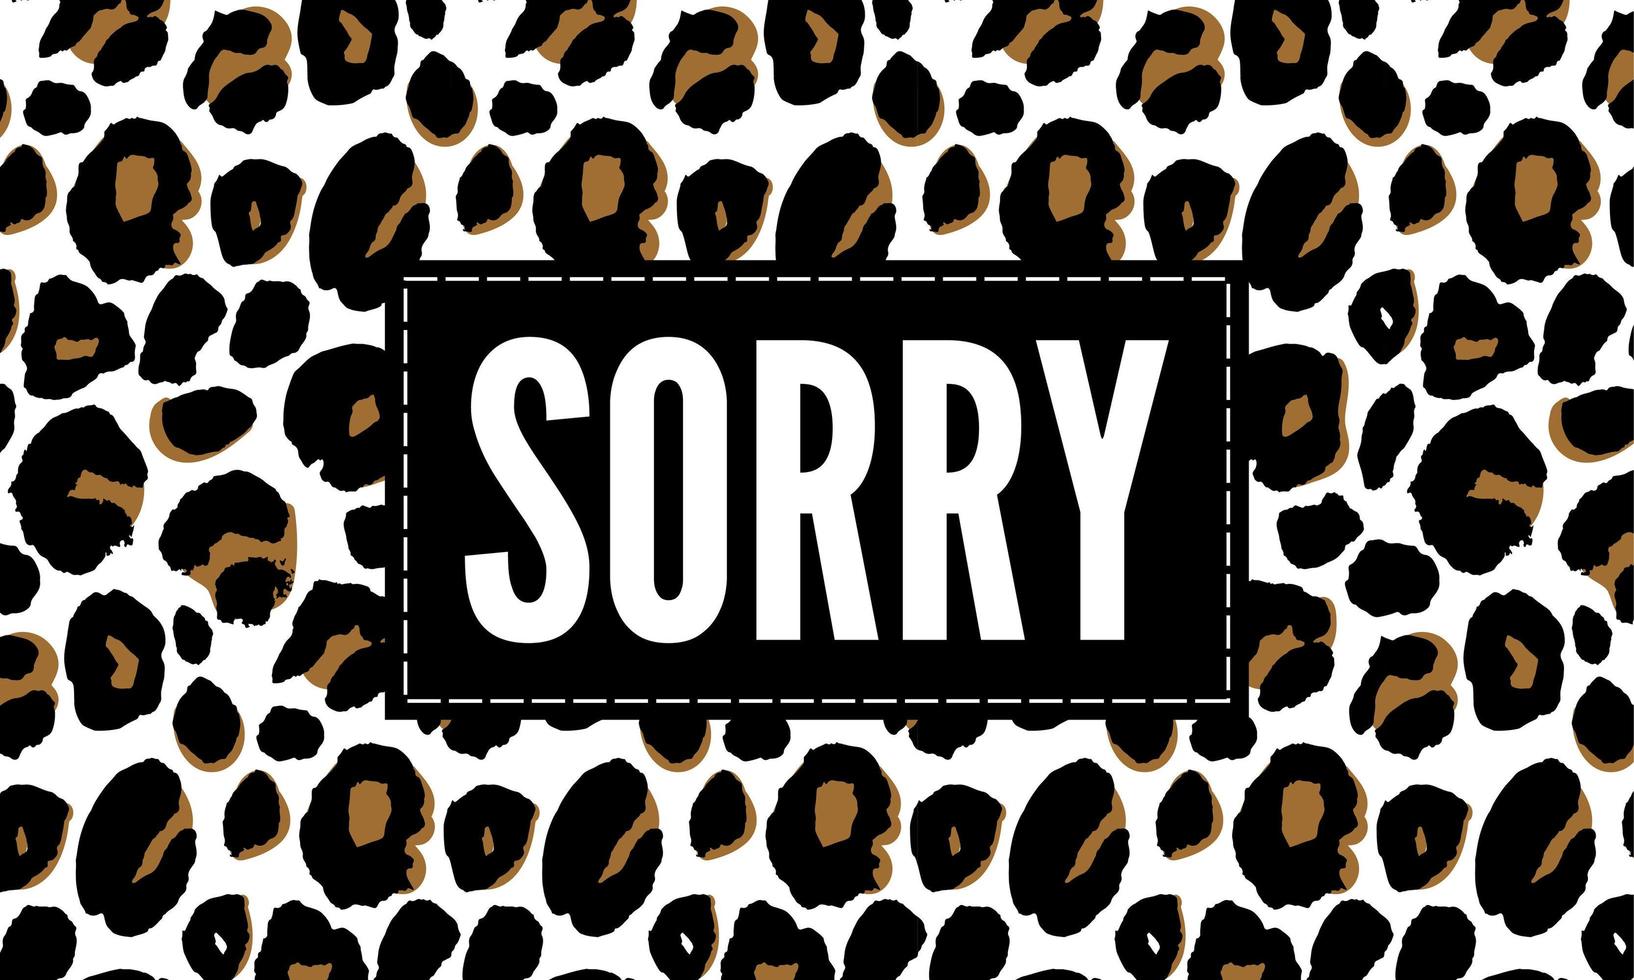 slogan Sorry Cool phrase graphic vector Print Fashion lettering calligraphy